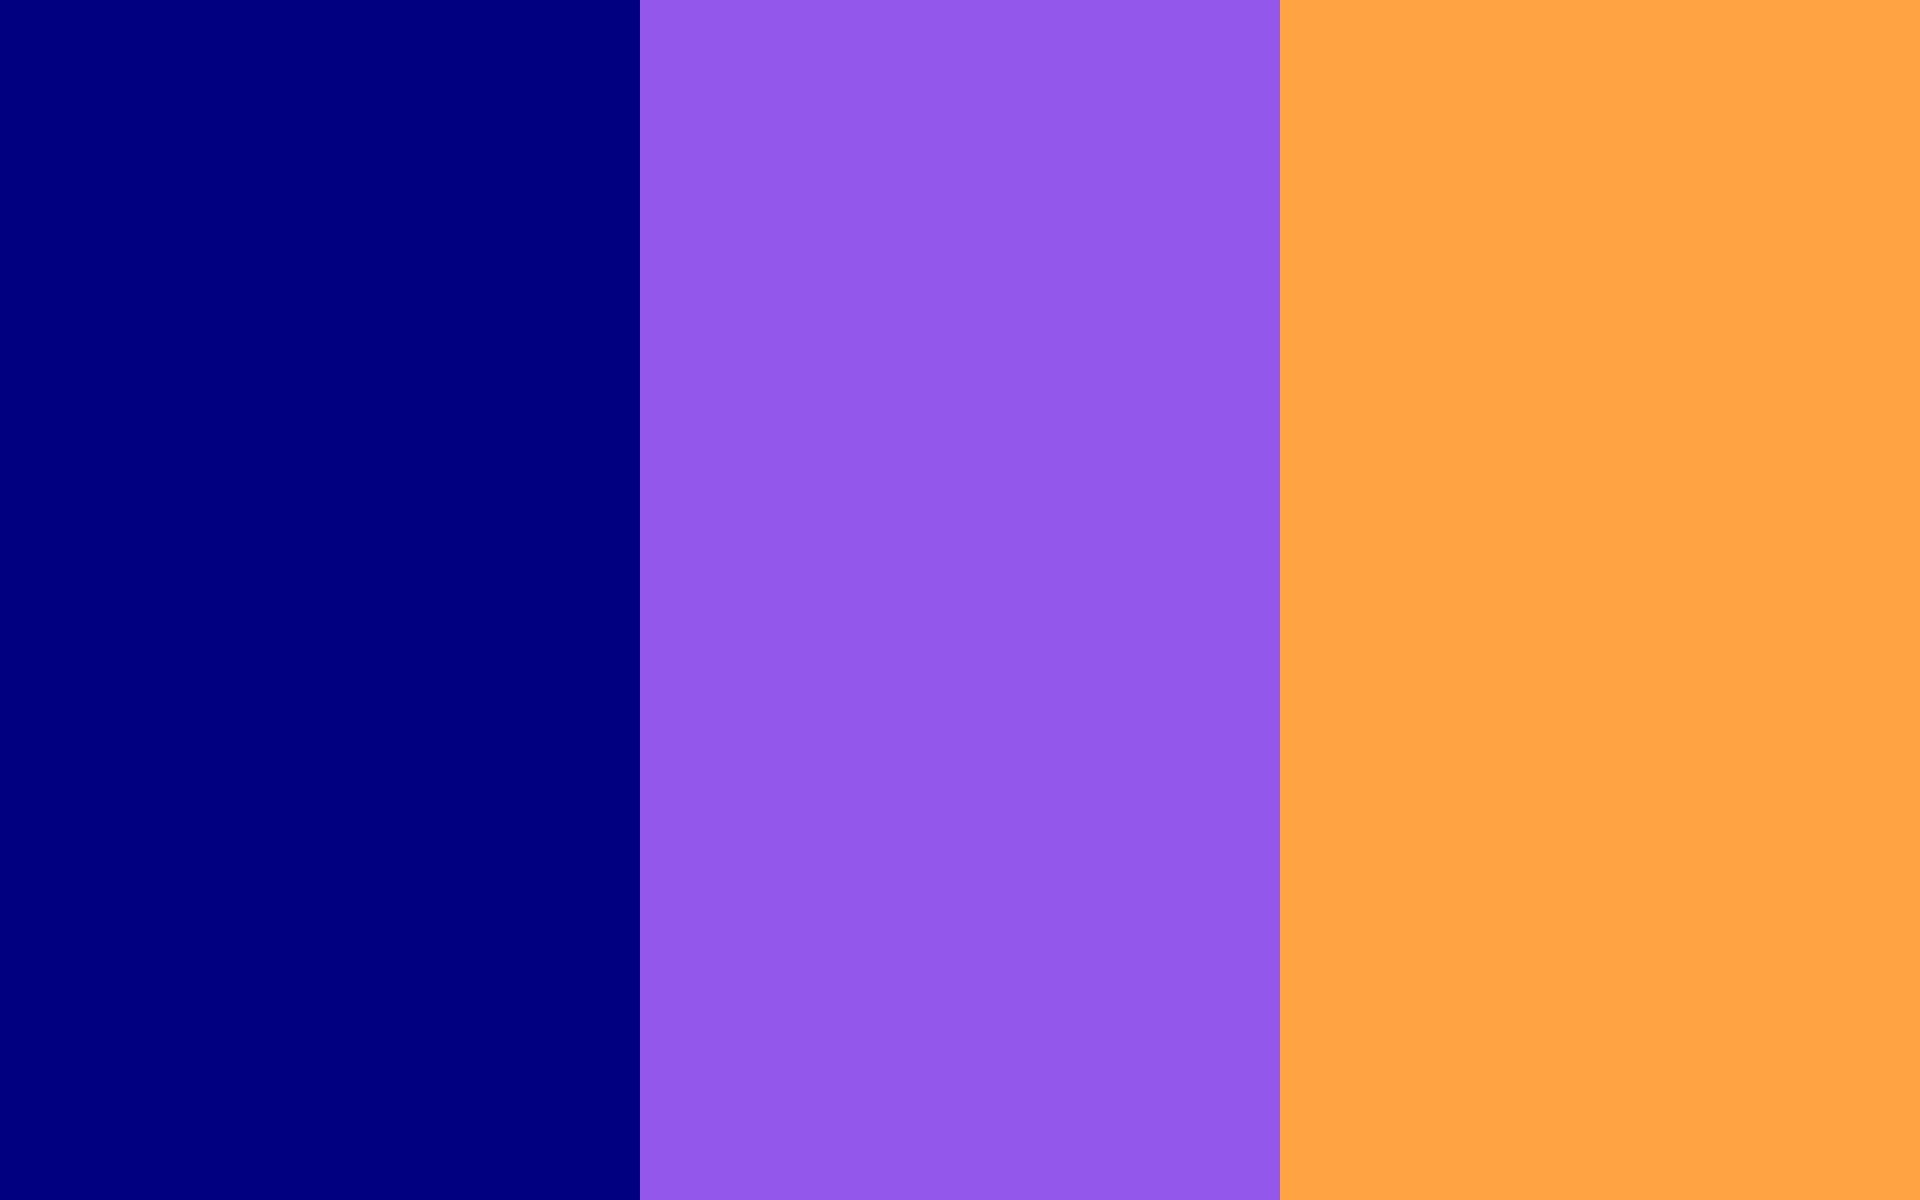 Navy Blue, Navy Purple and Neon Carrot solid three color background